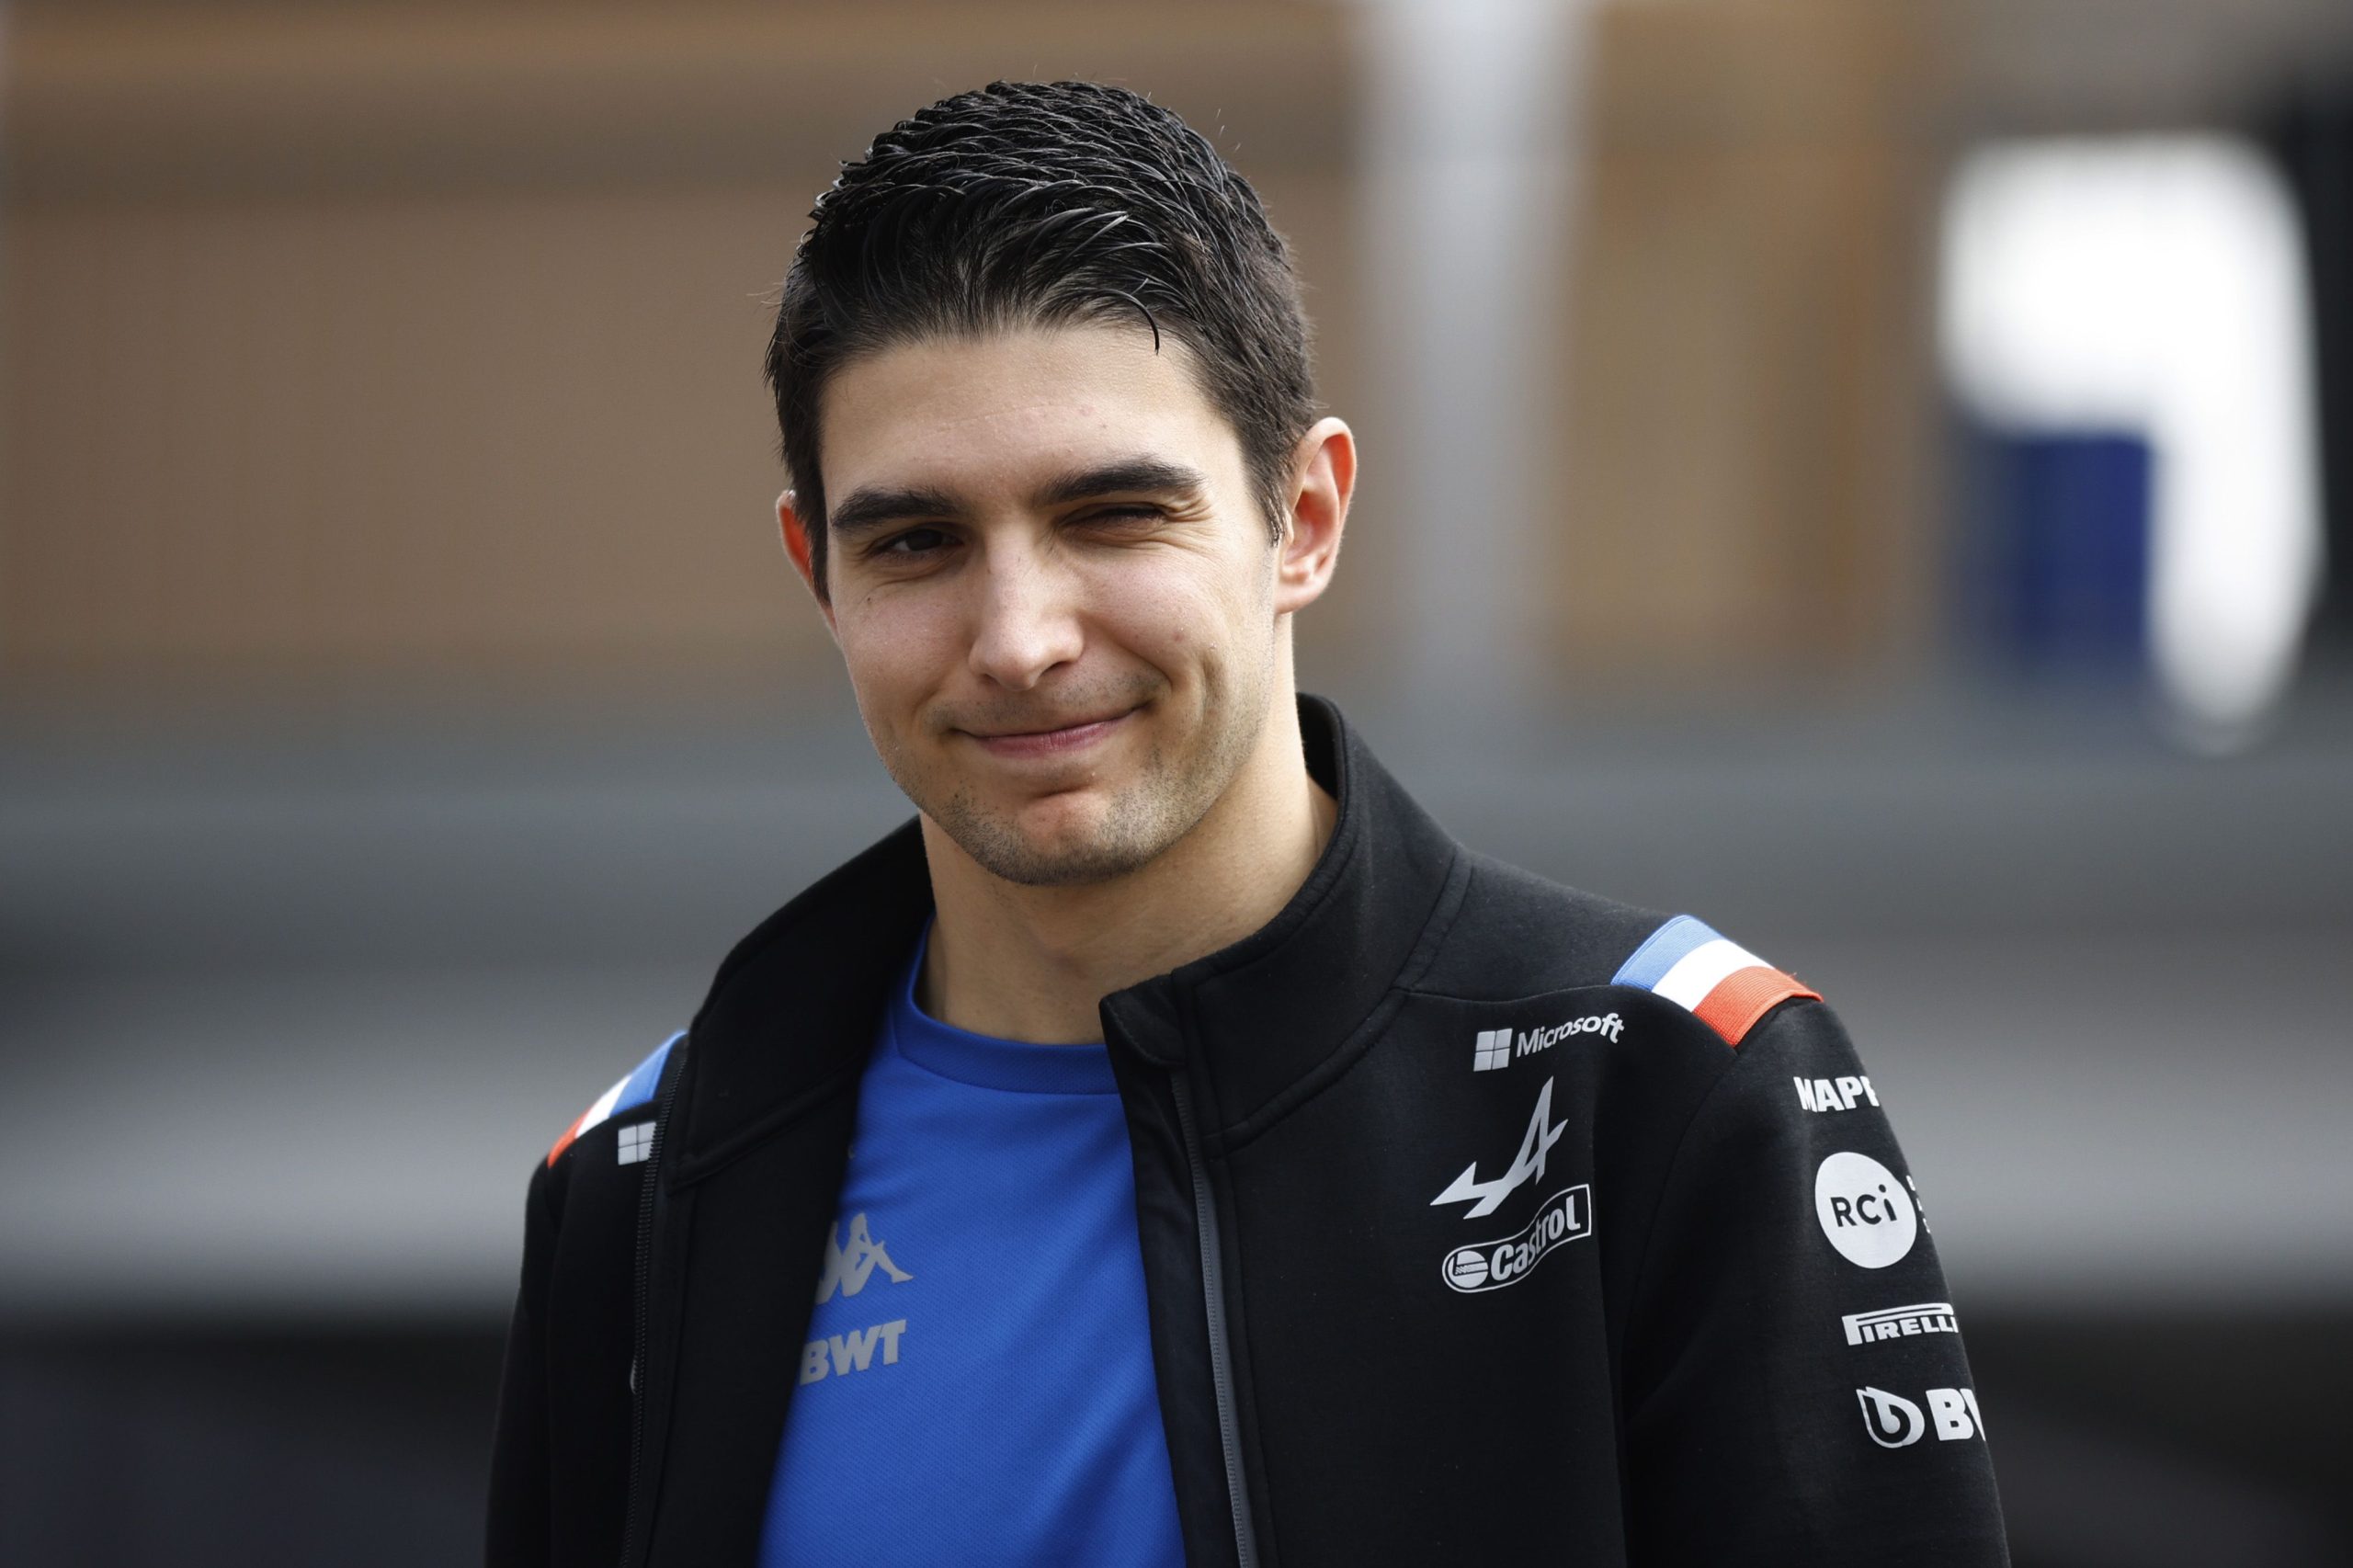 Ocon Criticizes Proposed F1 Points System Change as Superficial